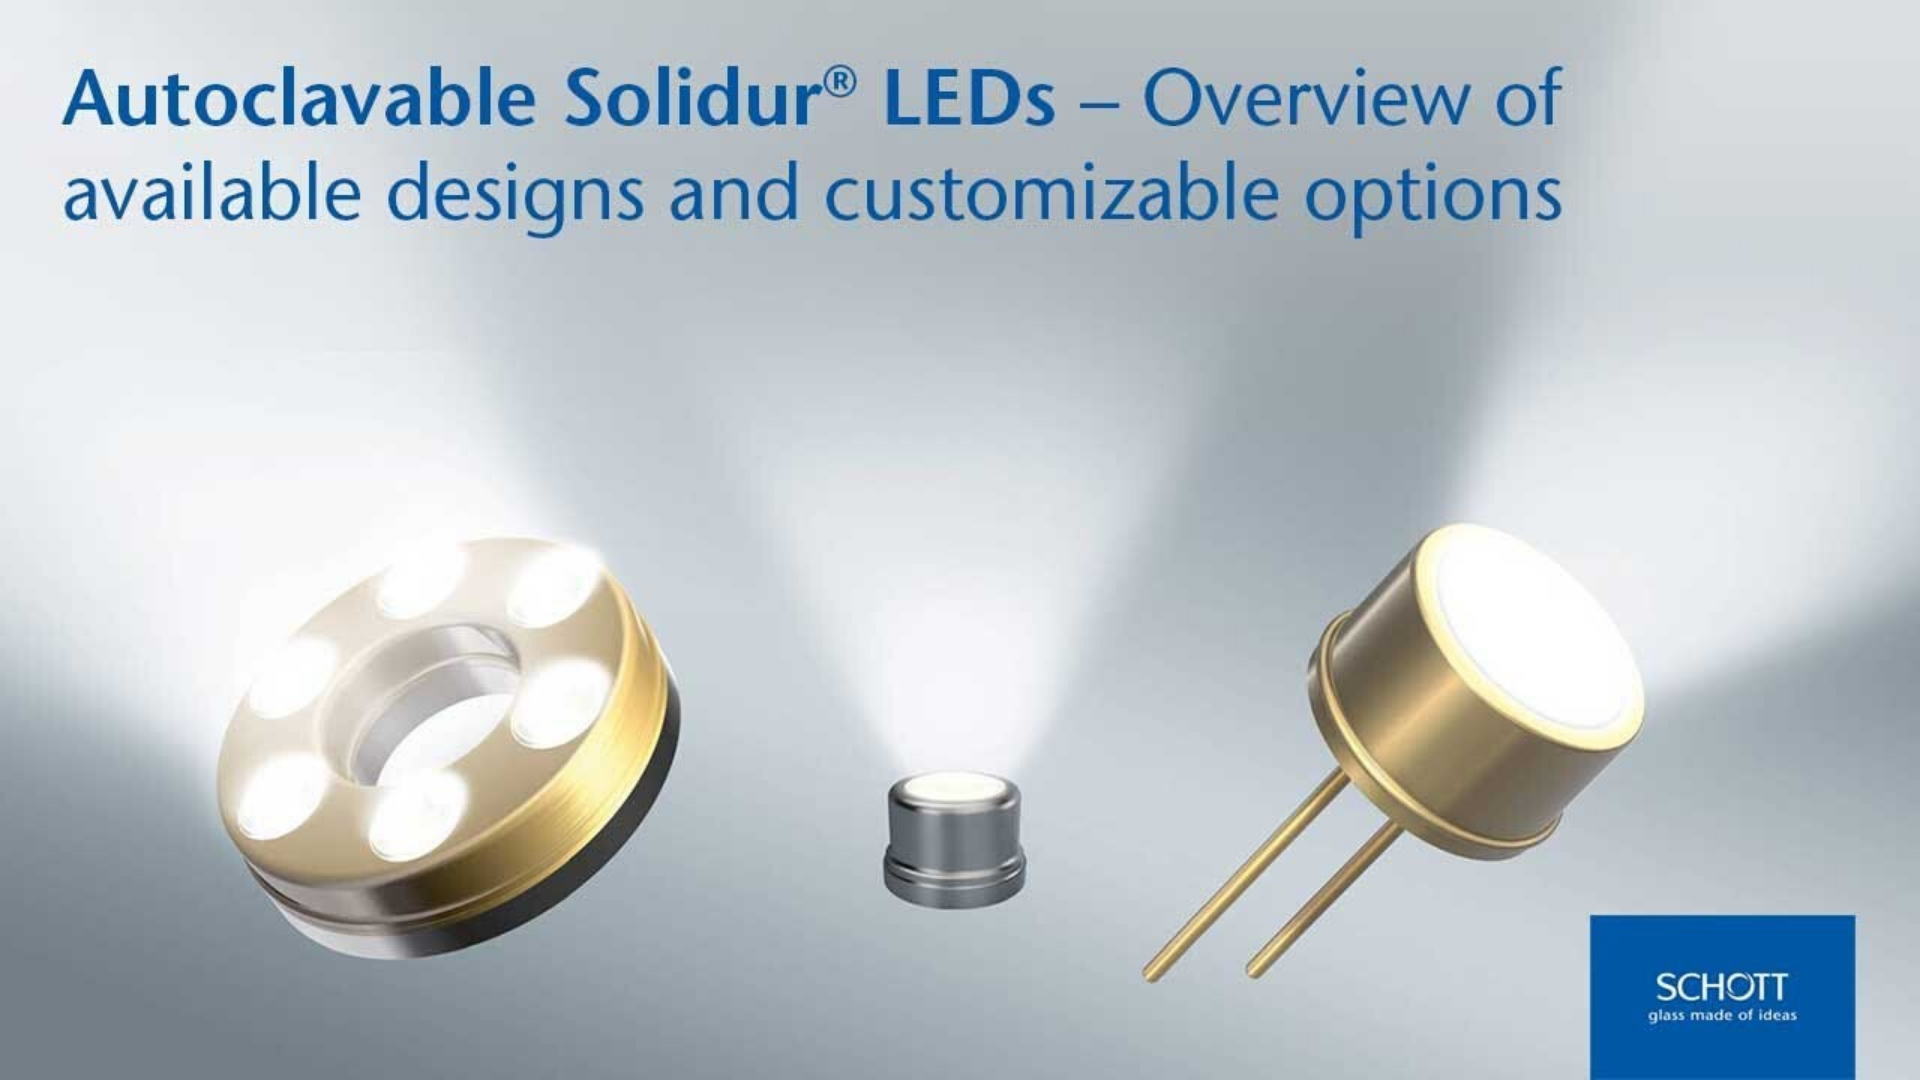 Click to find out more about the range of autoclavable SCHOTT Solidur® LEDs and their customizable options